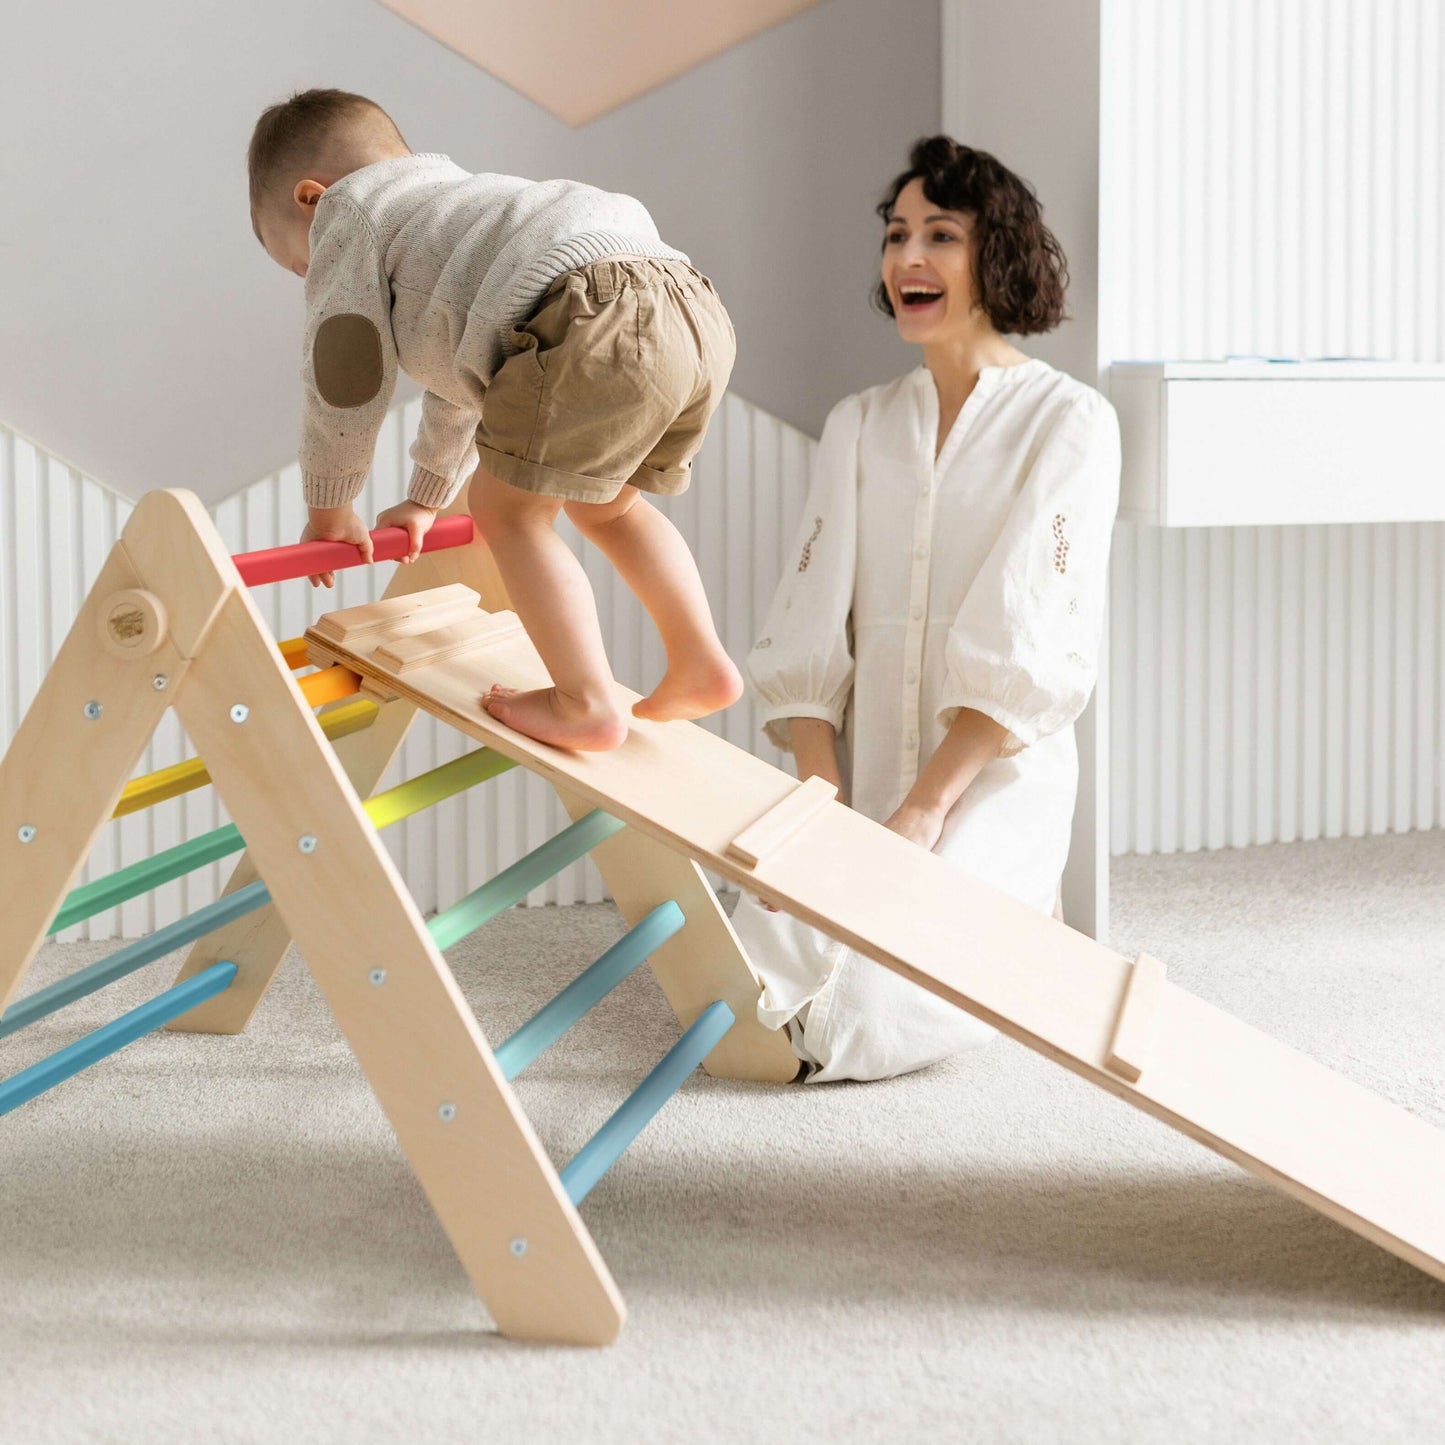 Set Pikler triangle, slide board, swing arch - various colors